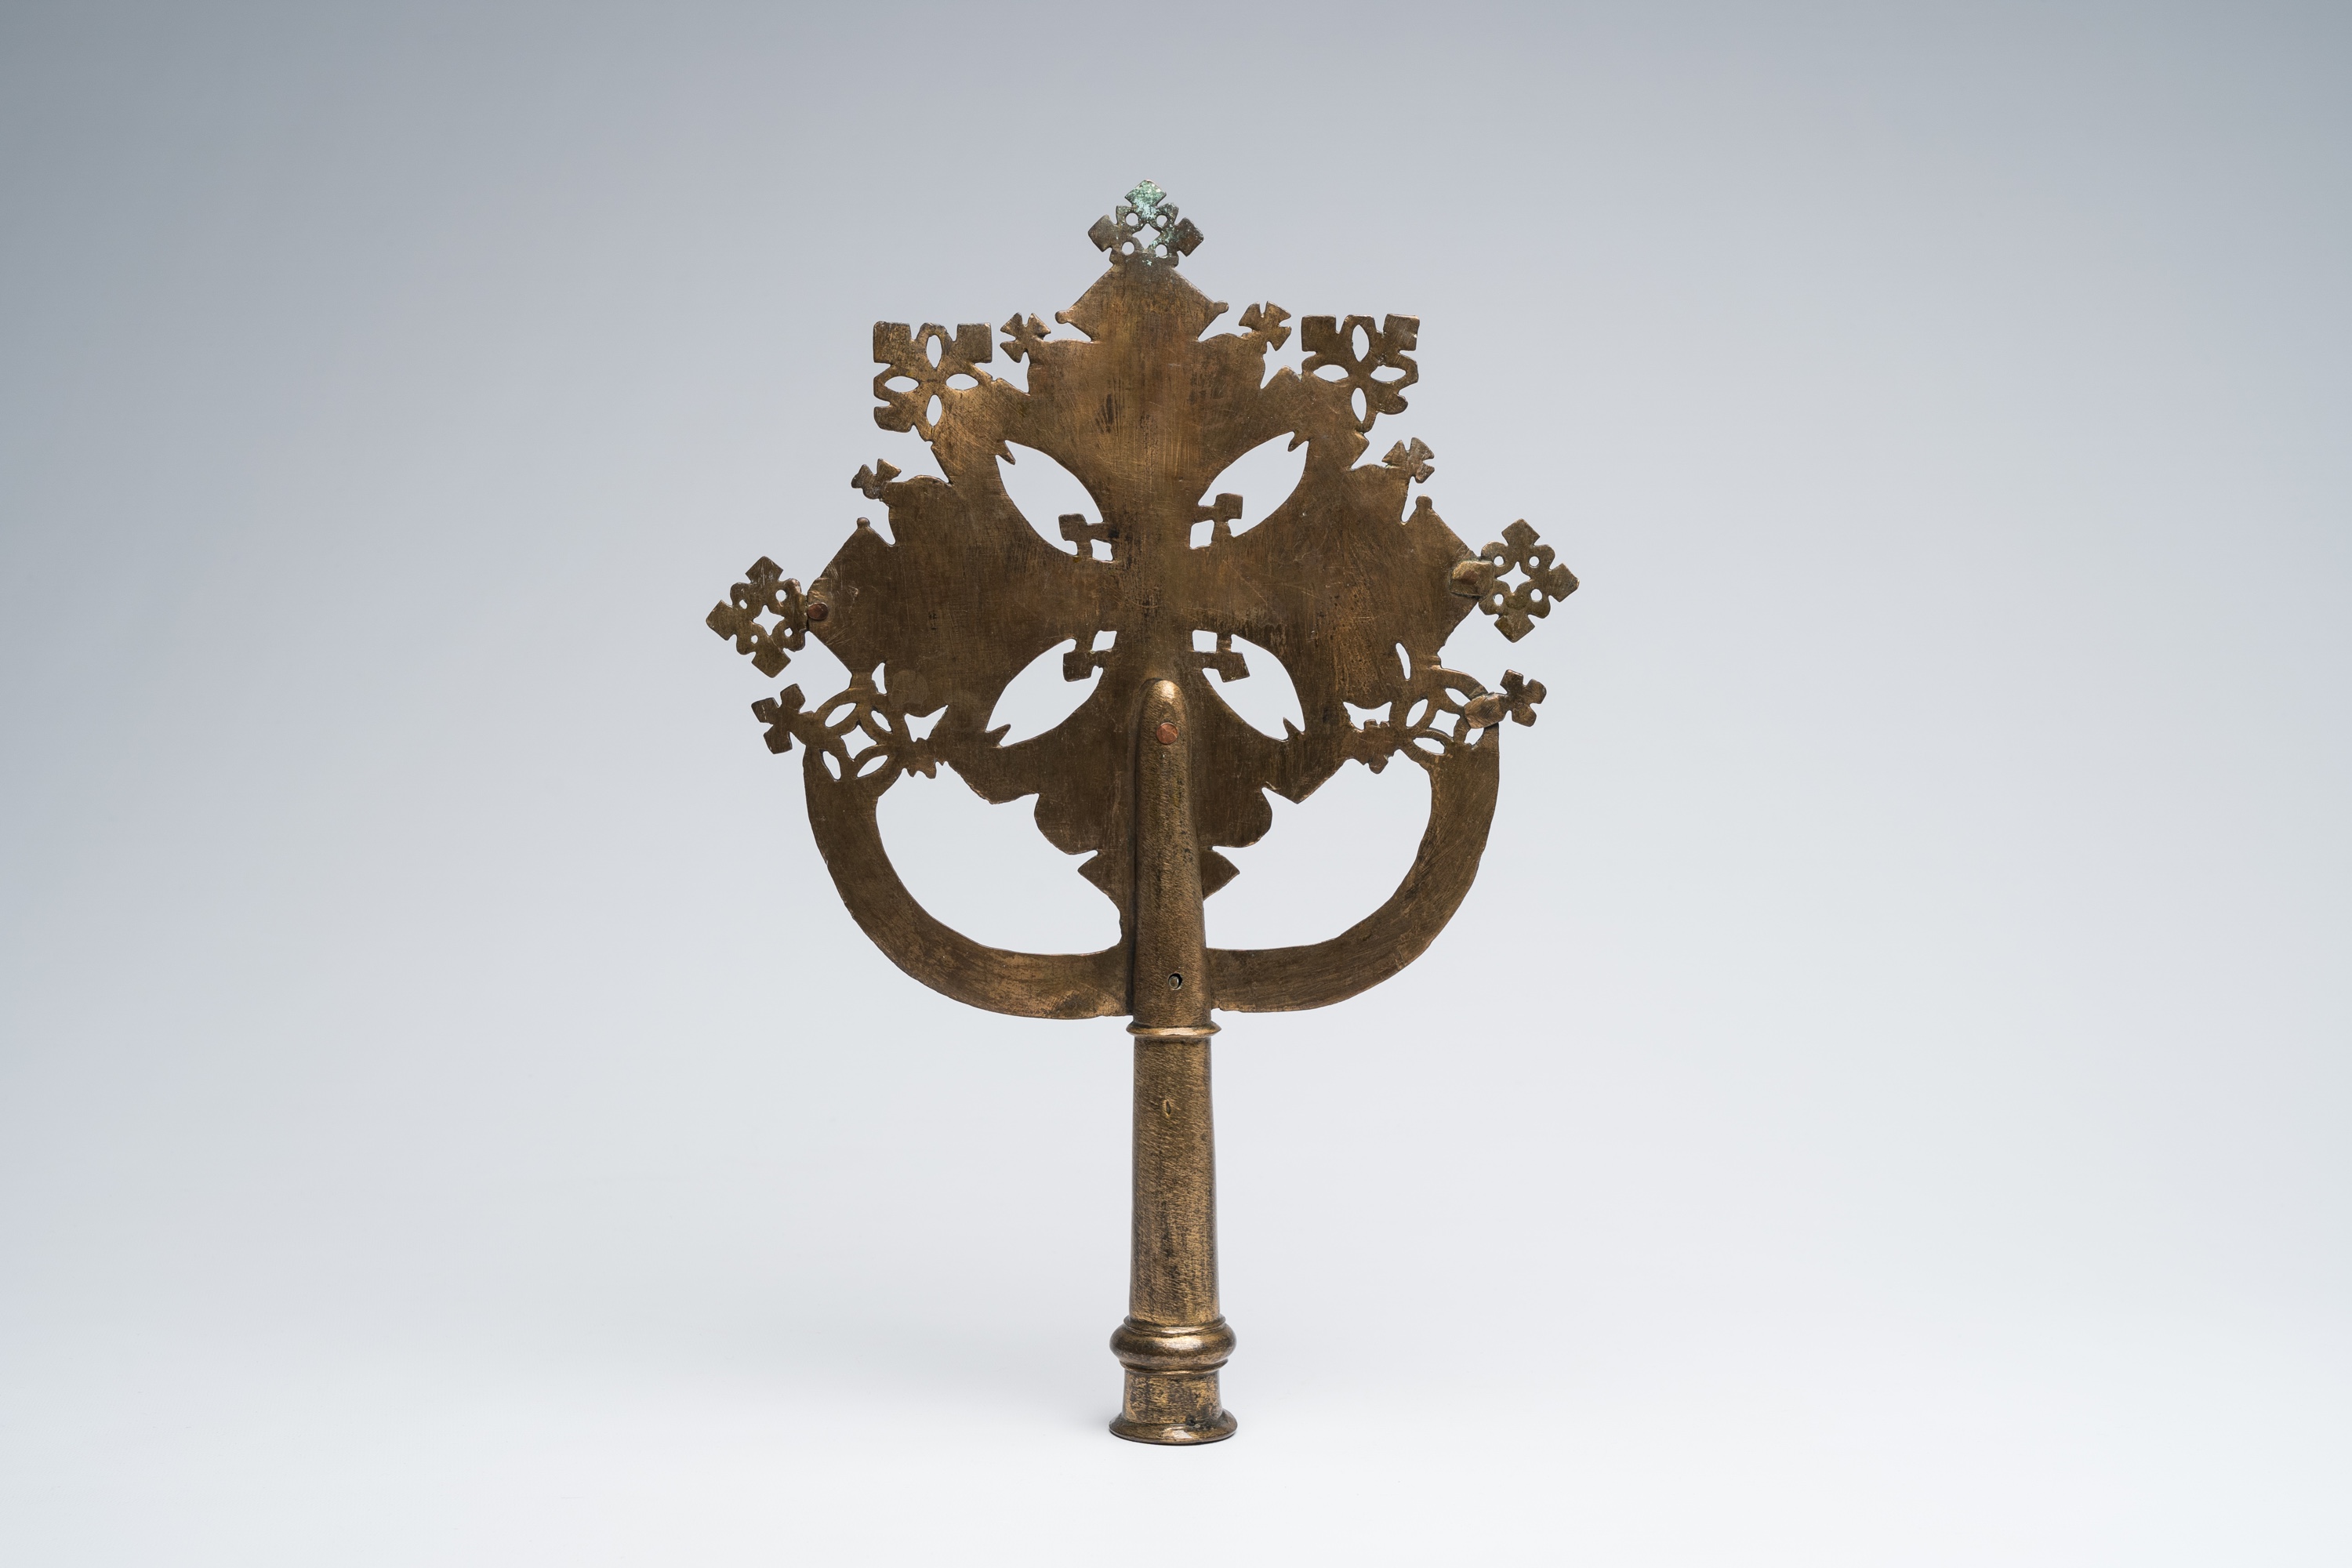 A Coptic orthodox brass processional cross, Gondar, Ethiopia, probably 19th C. - Image 3 of 6